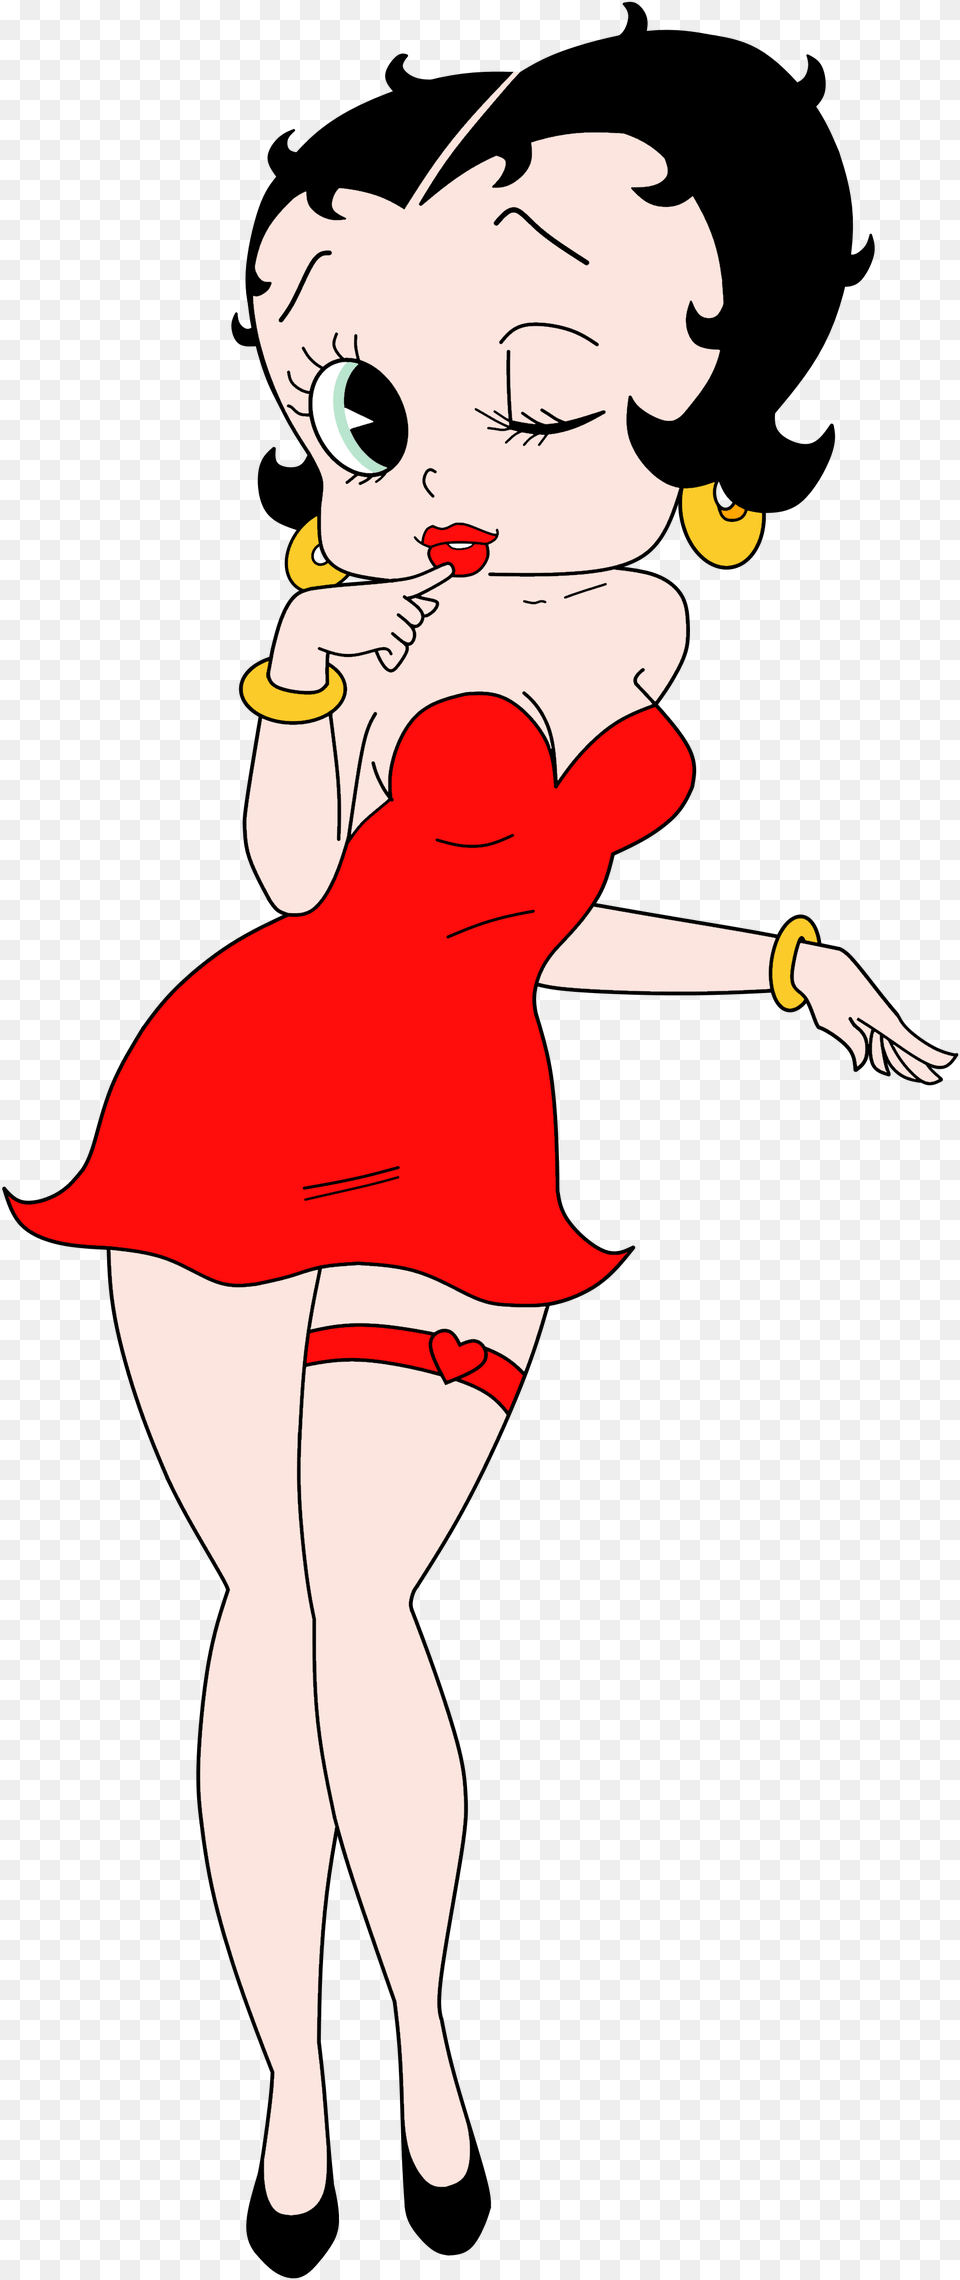 Betty Boop Anime Render Betty Boop Transparent Background, Baby, Person, Cartoon, Dancing Png Image